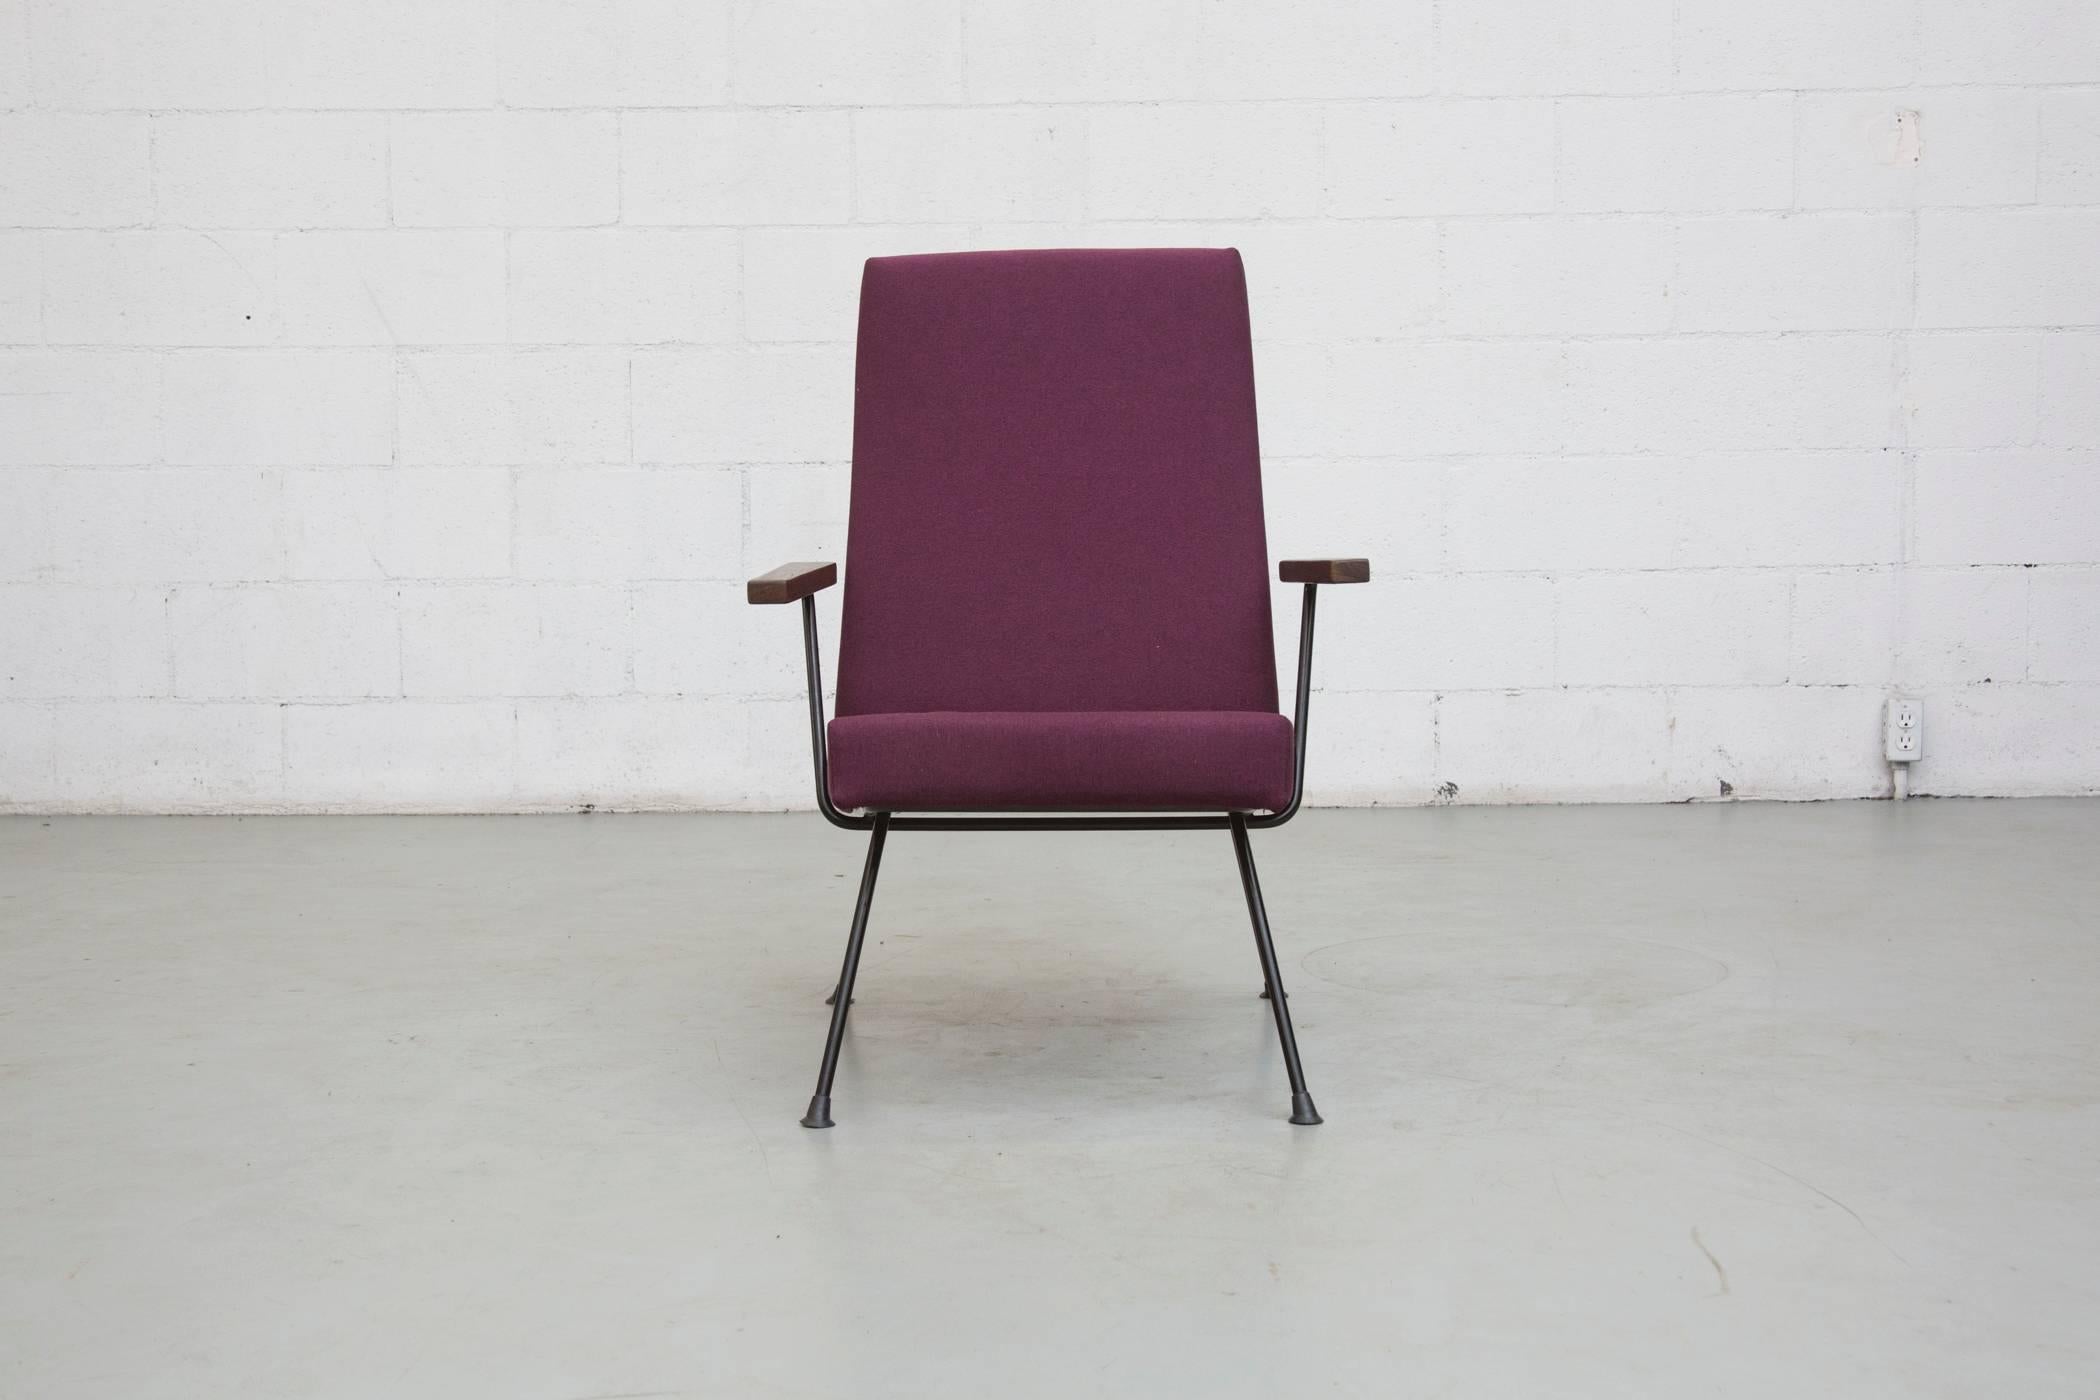 Kembo chair designed by Wim Rietveld. Black enameled body. Wire legs and arms with Wenge arm rests. Freshly upholstered in plum. Frame in original condition with some signs of wear.